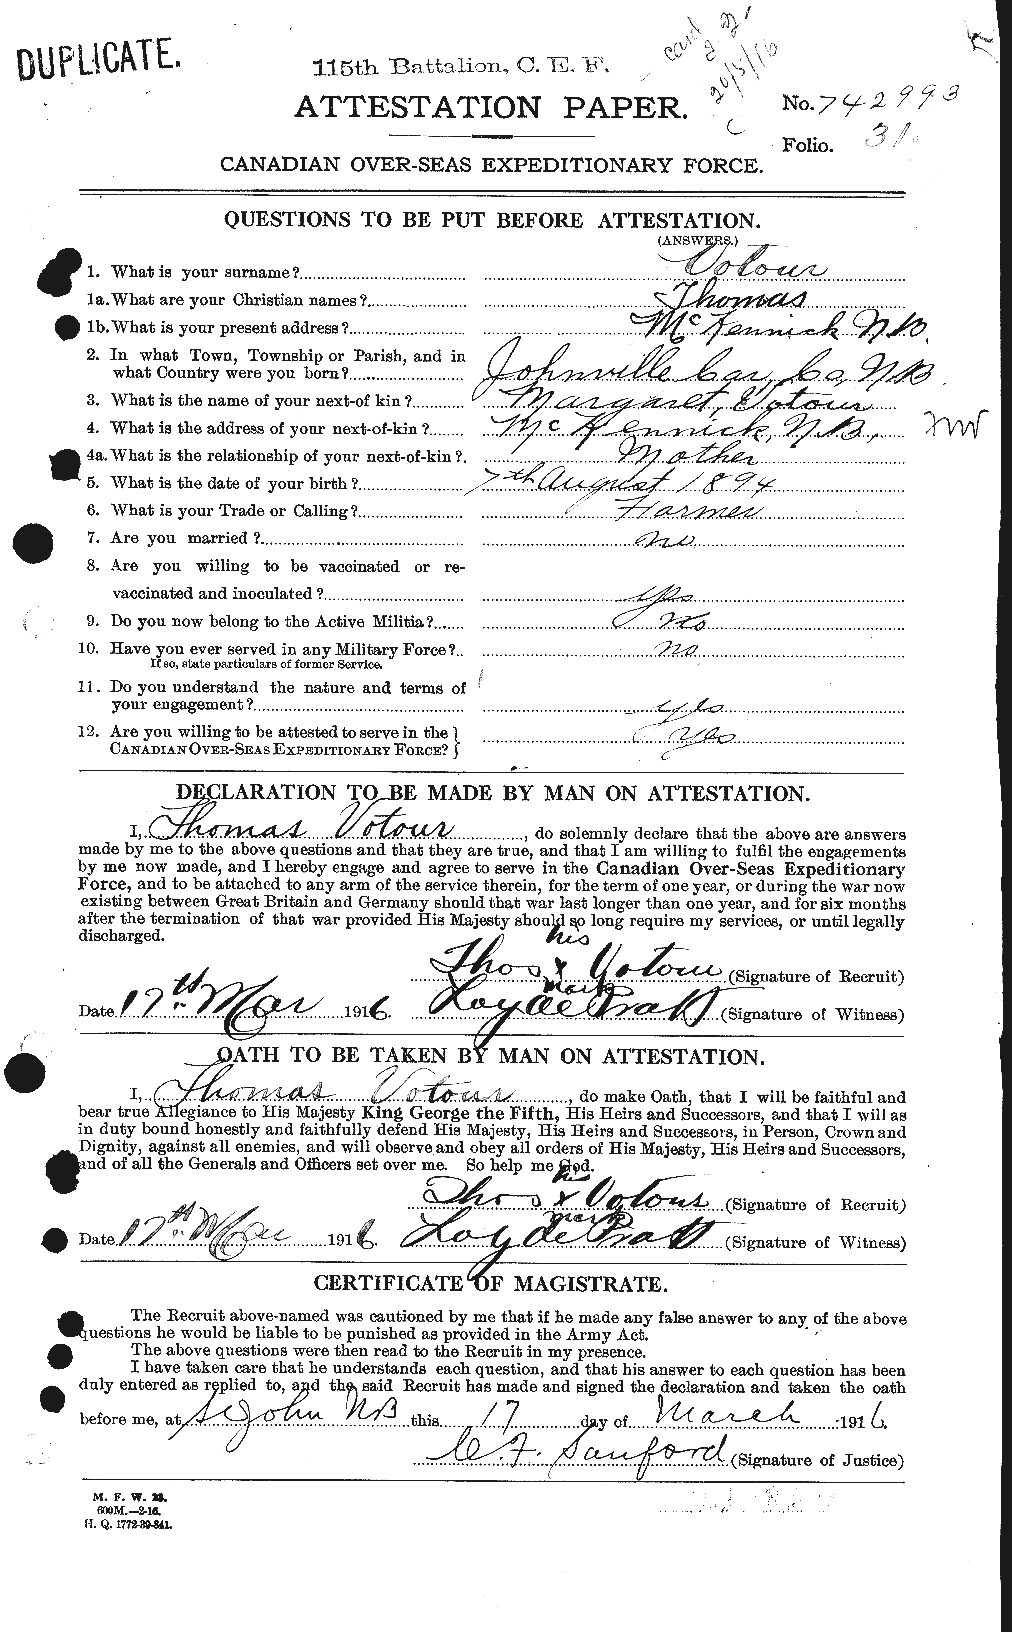 Personnel Records of the First World War - CEF 652437a